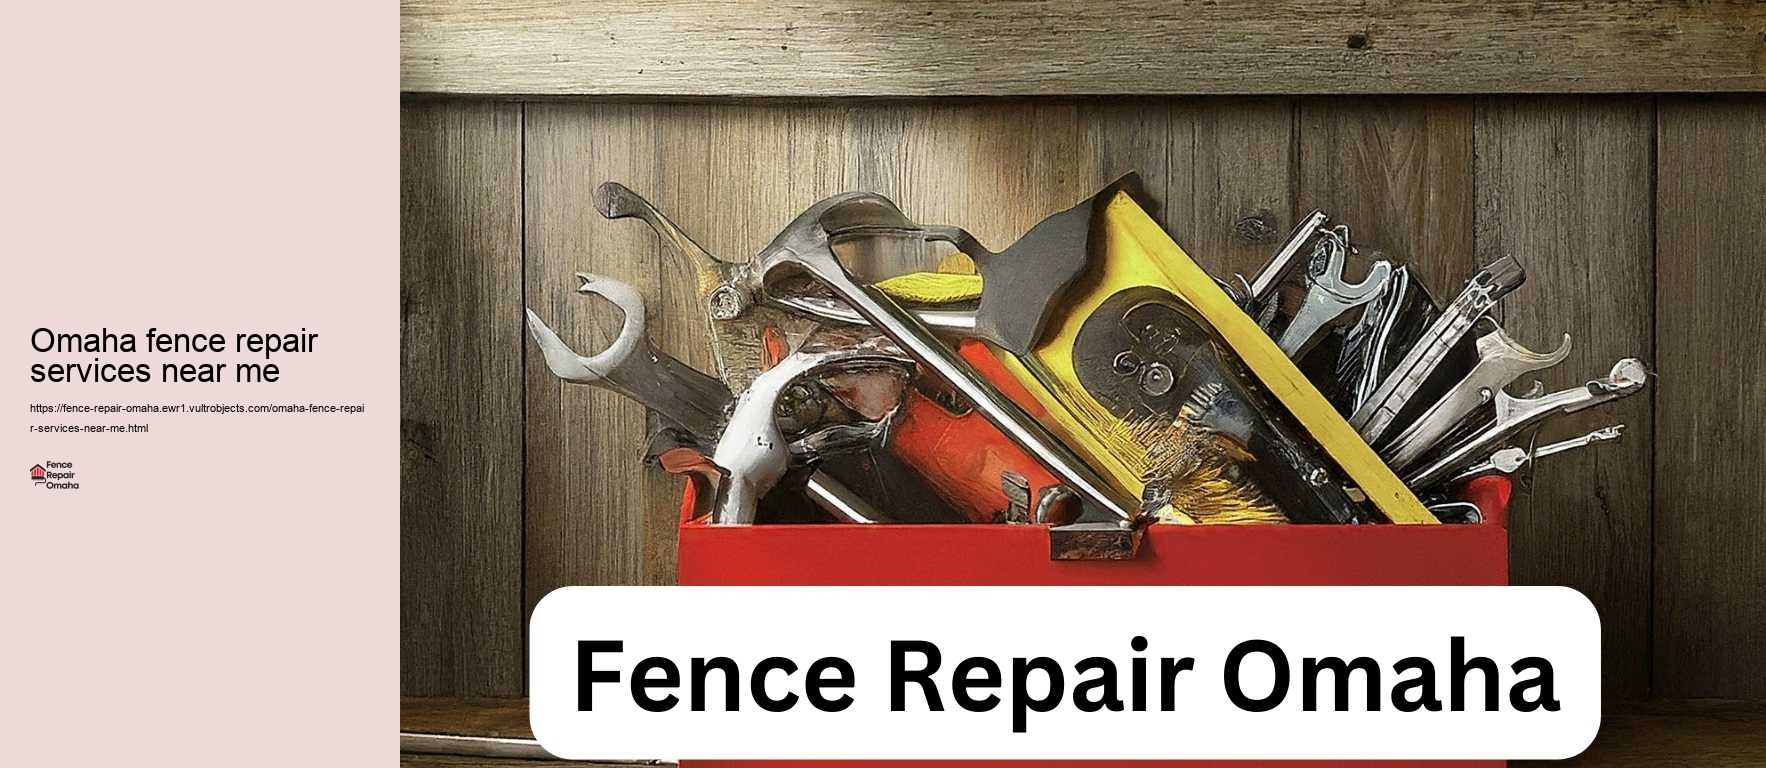 Omaha fence repair services near me